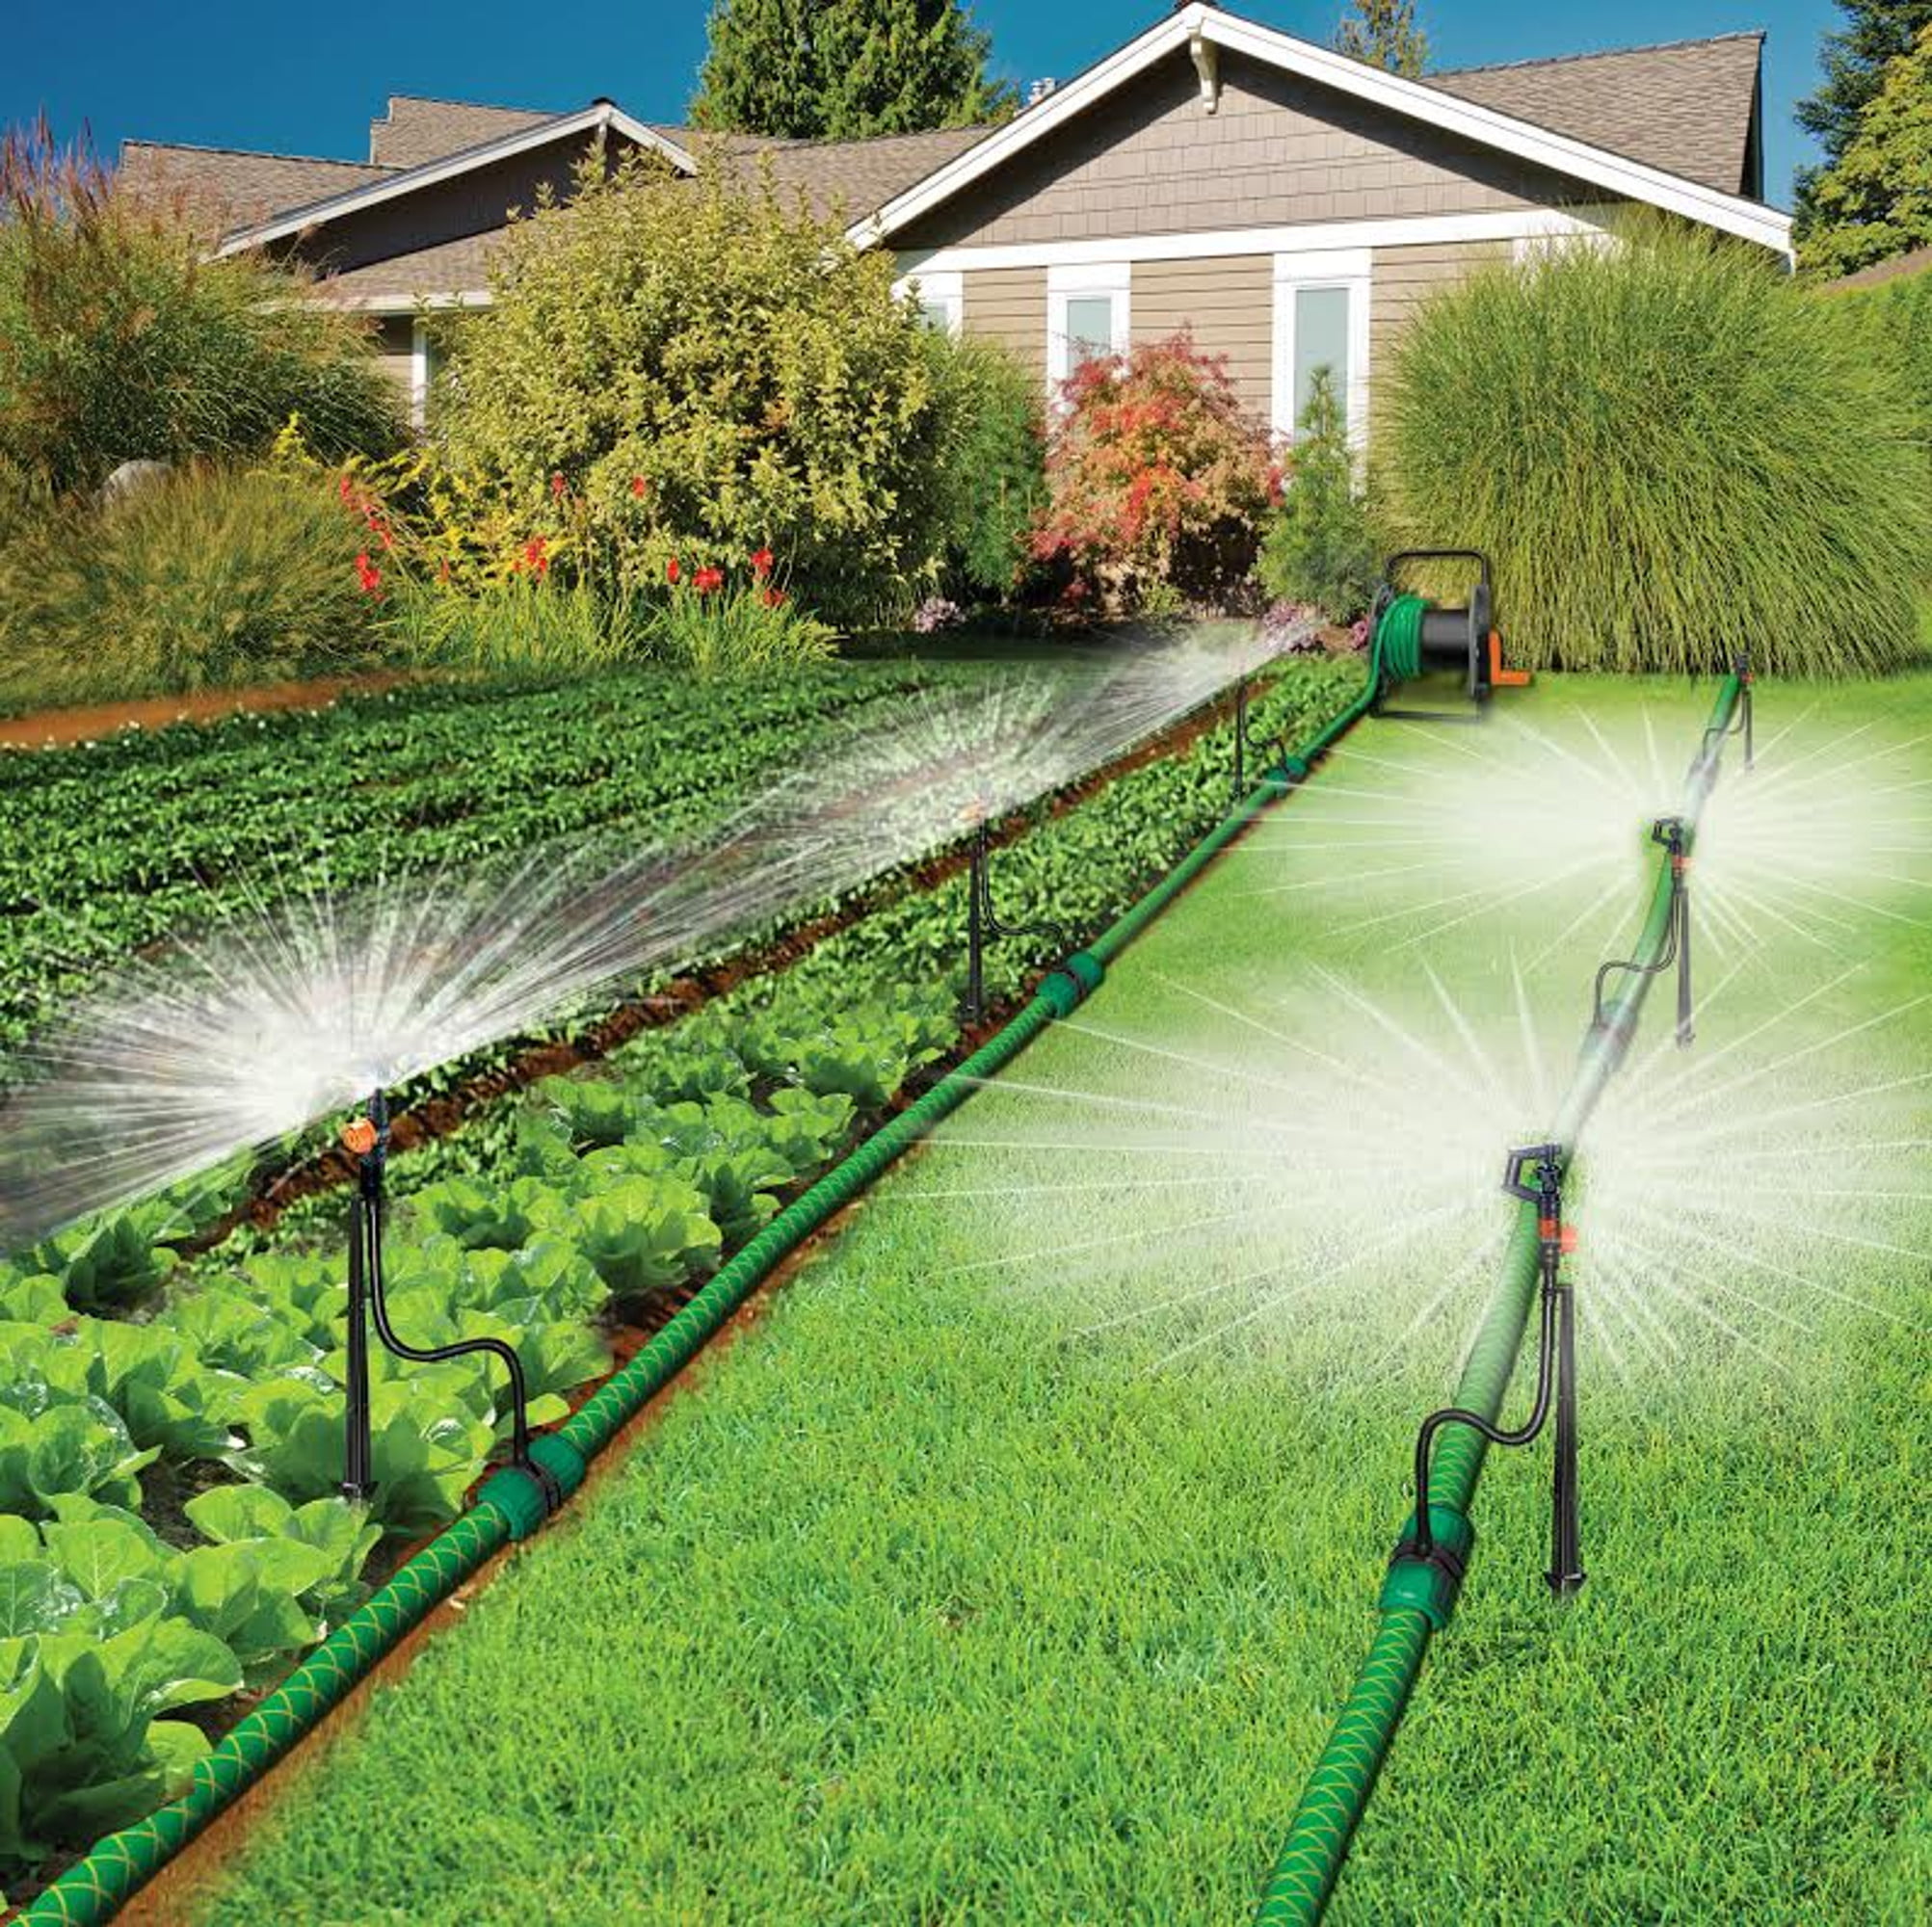 131FT Automatic Irrigation System Hose Drip Sprinklers Garden Lawn Watering  K 